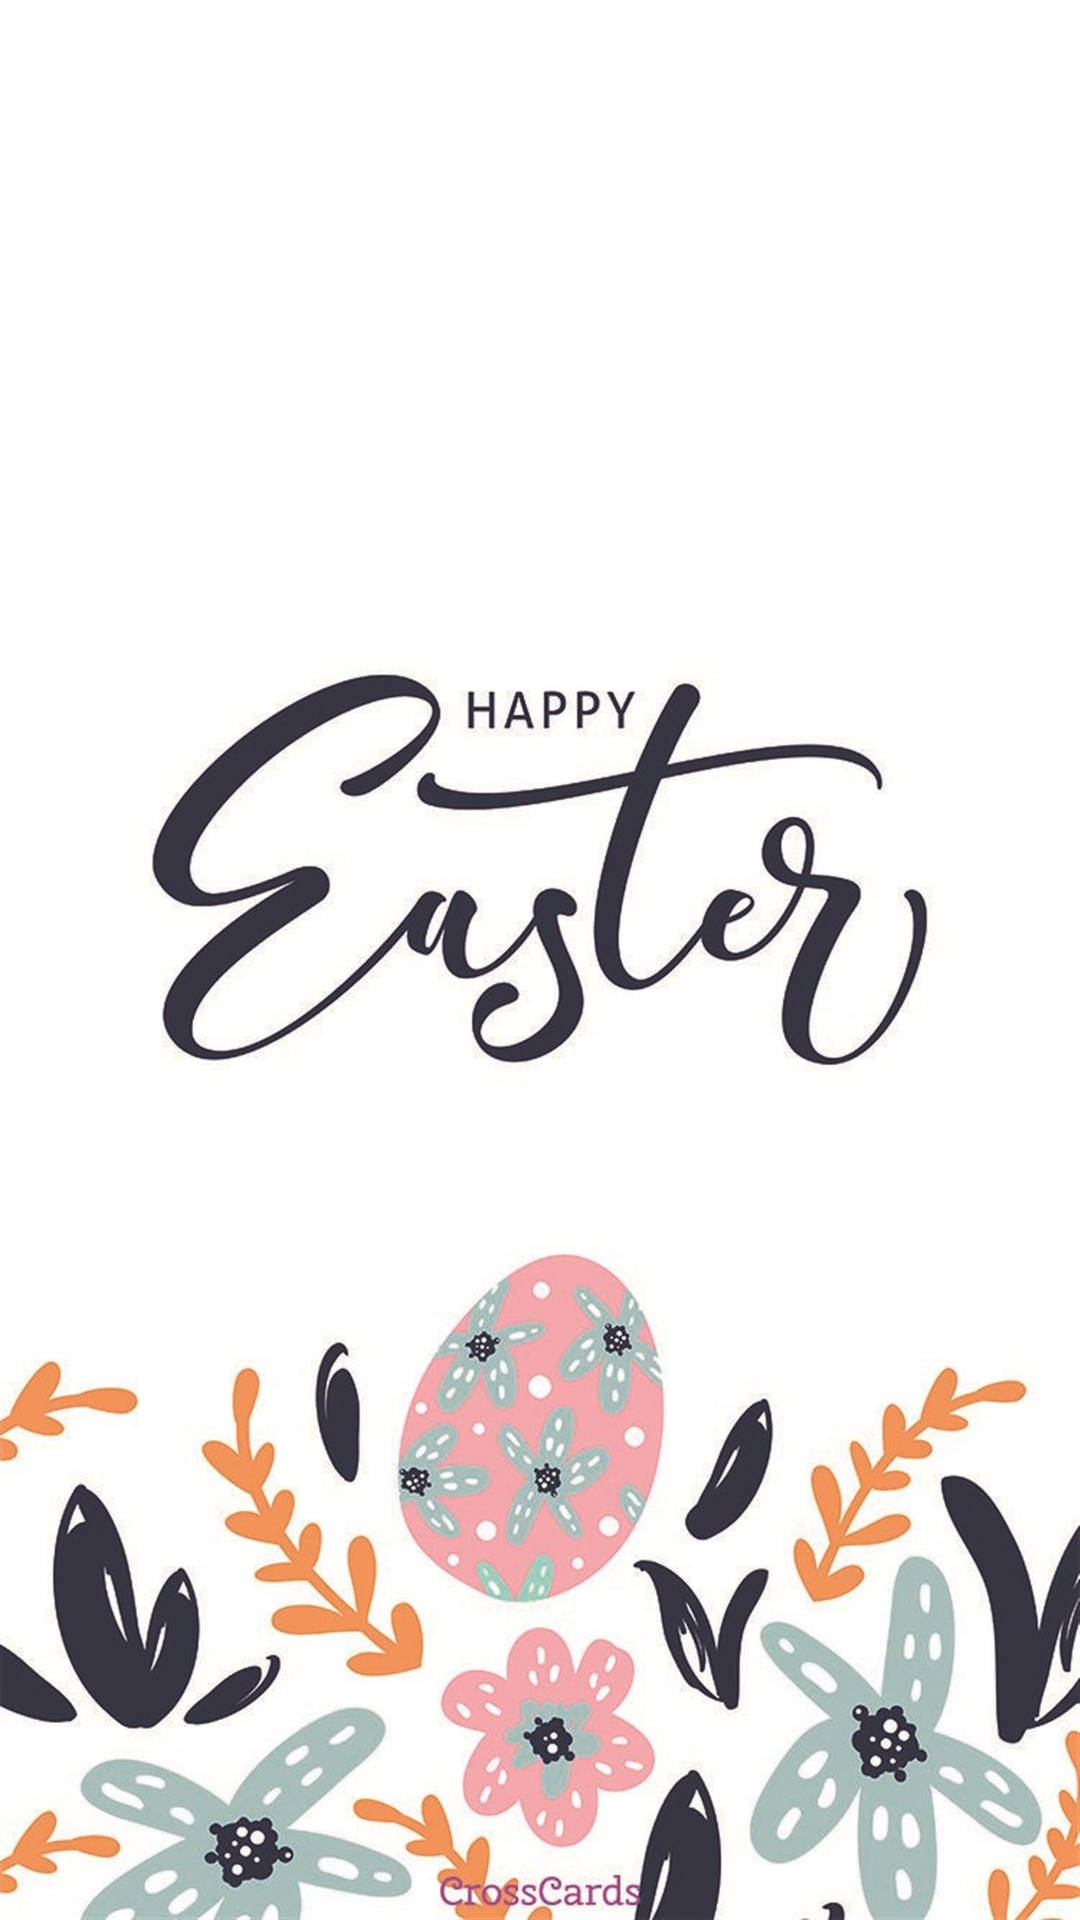 Get ready for Easter with a festive smartphone decoration! Wallpaper